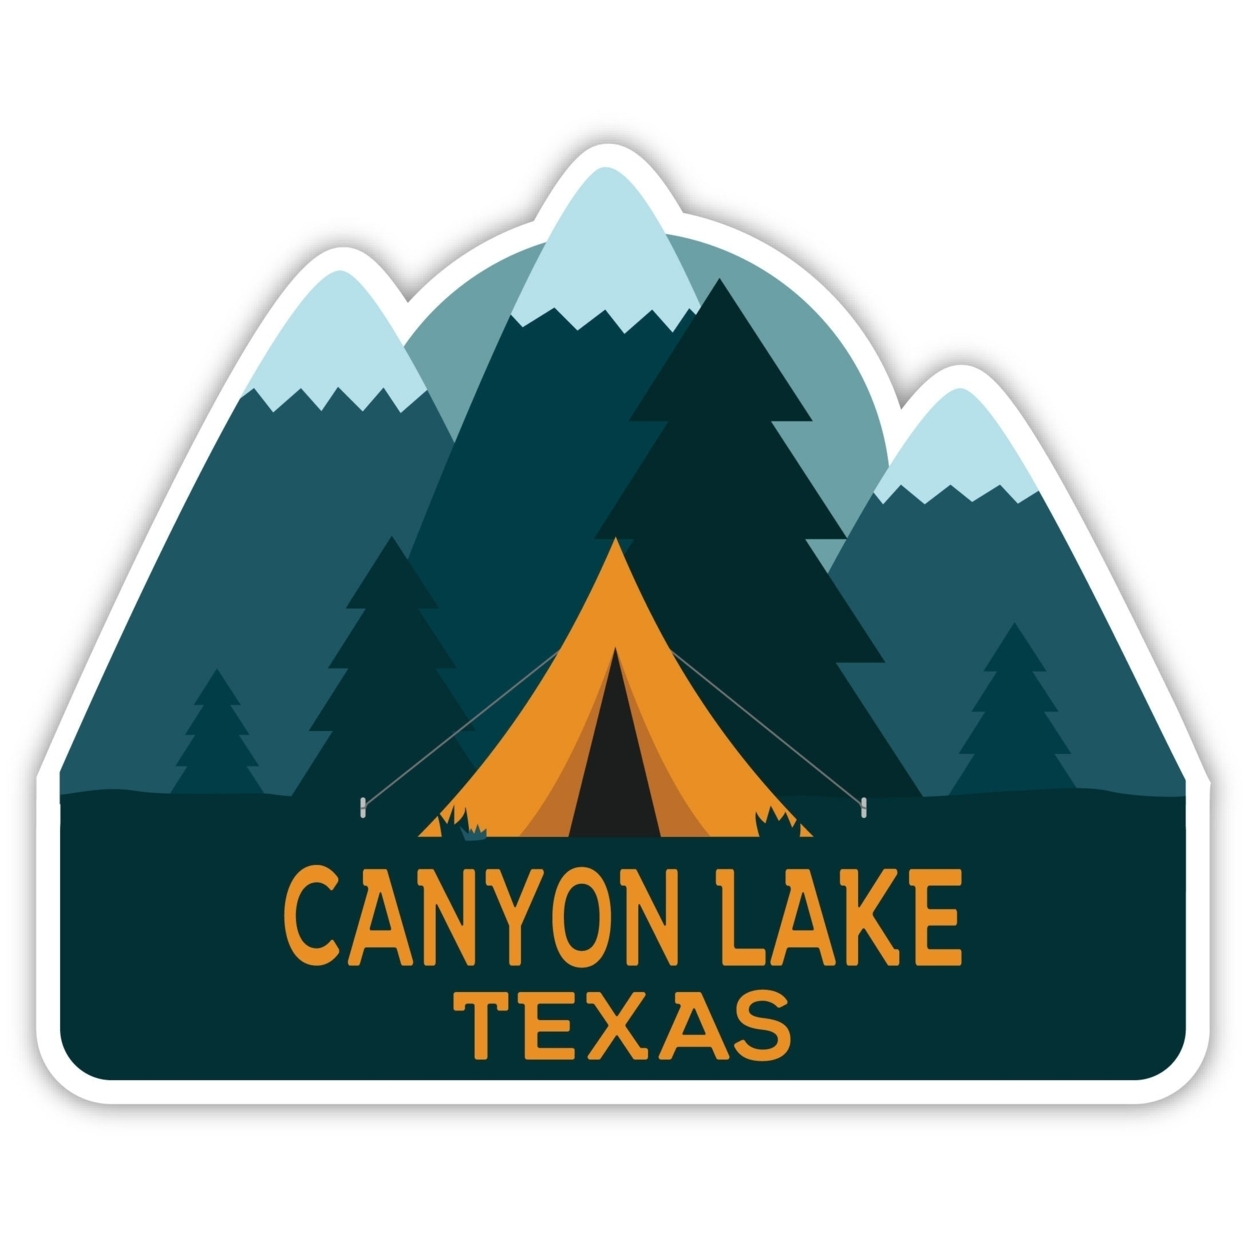 Canyon Lake Texas Souvenir Decorative Stickers (Choose Theme And Size) - 4-Pack, 6-Inch, Tent